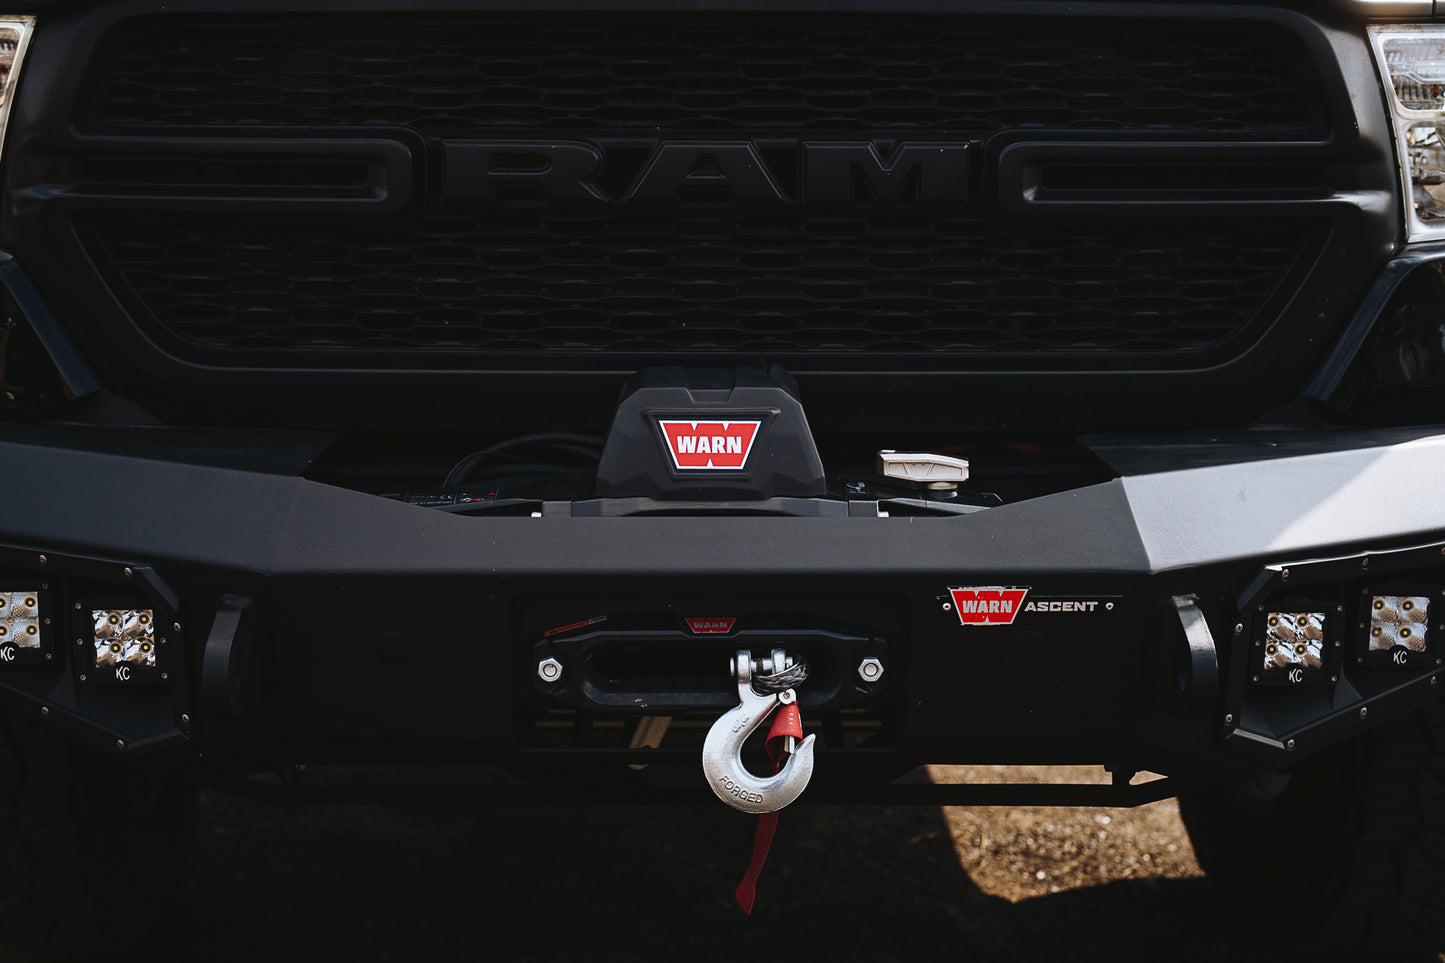 warn ascent recovery winch used upgraded dodge ram eco diesel overland truck for sale in san antonio texas at hawkes outdoors